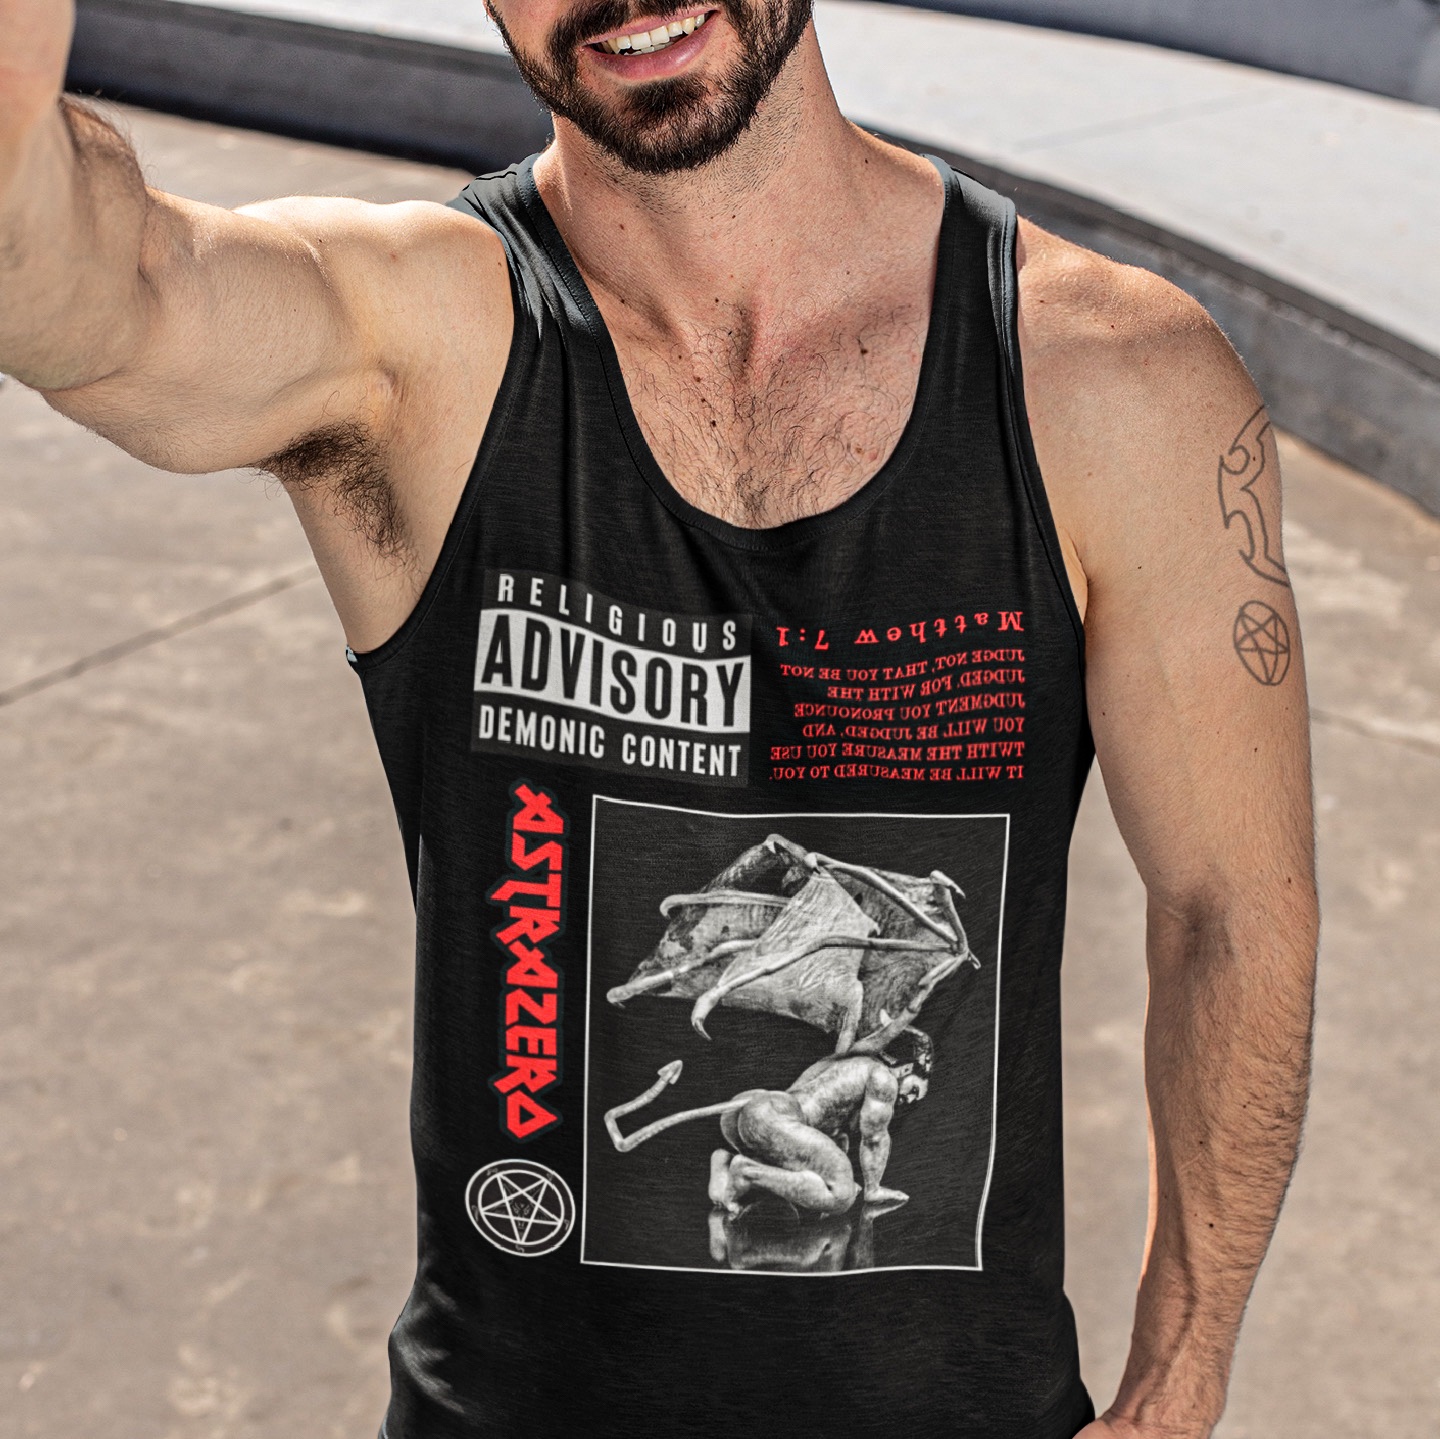 Featured image for “Religious Advisory - Unisex Tank Top”